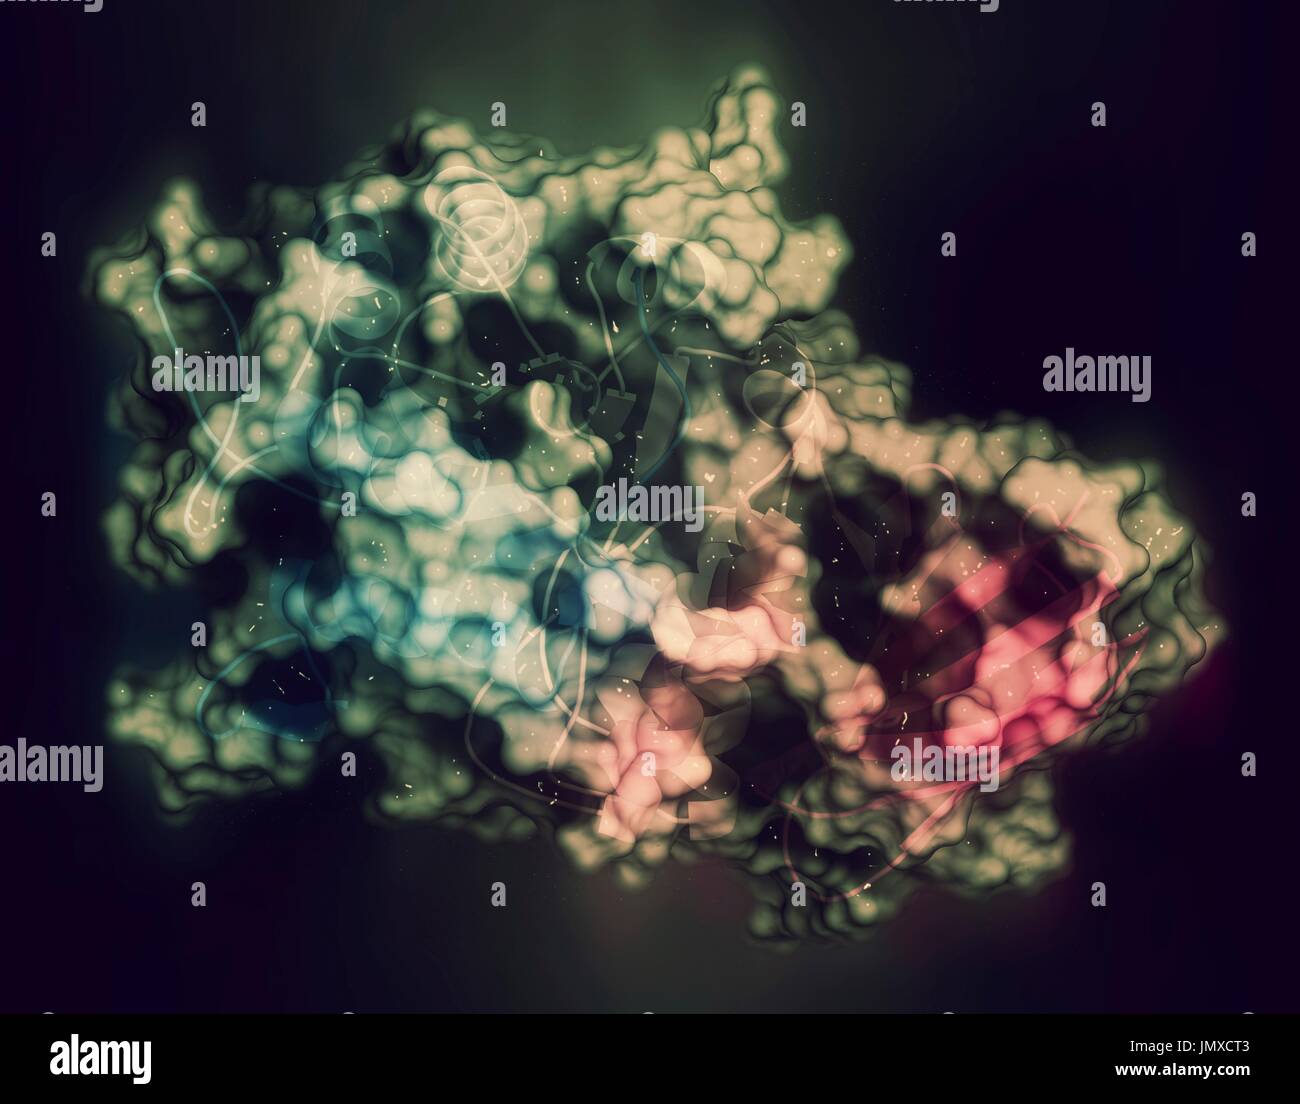 Alpha-galactosidase (Agalsidase) enzyme. Cause of Fabry's disease. Administered as enzyme replacement therapy. Stylized combination of a semi-transparent surface model with a cartoon representation. Cartoon: gradient colouring (N-terminus blue, C-terminus pink). Stock Photo